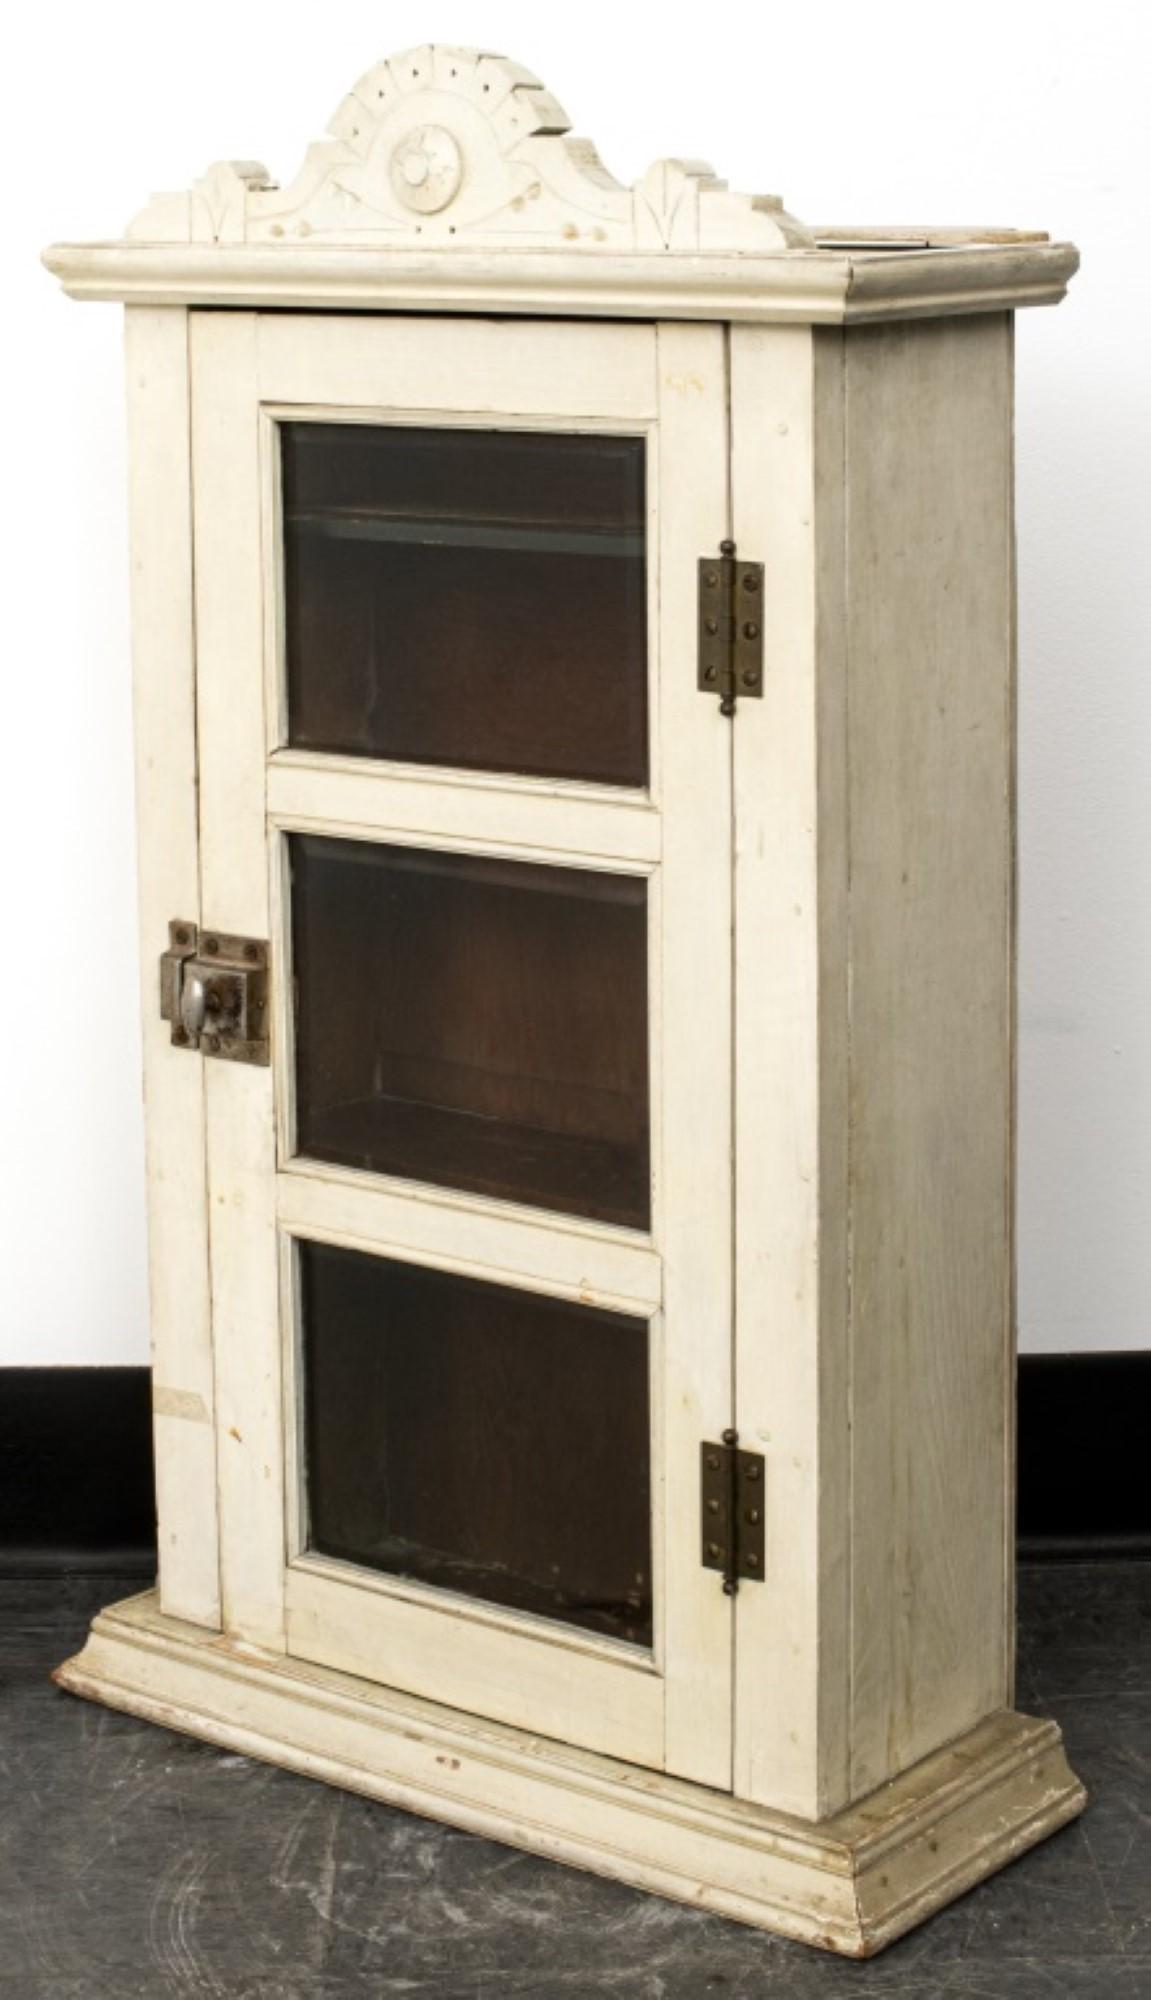 Rustic White Painted Hanging Cupboard

Features: Glazed door and shelves, rustic white painted finish.

Dealer: S138XX